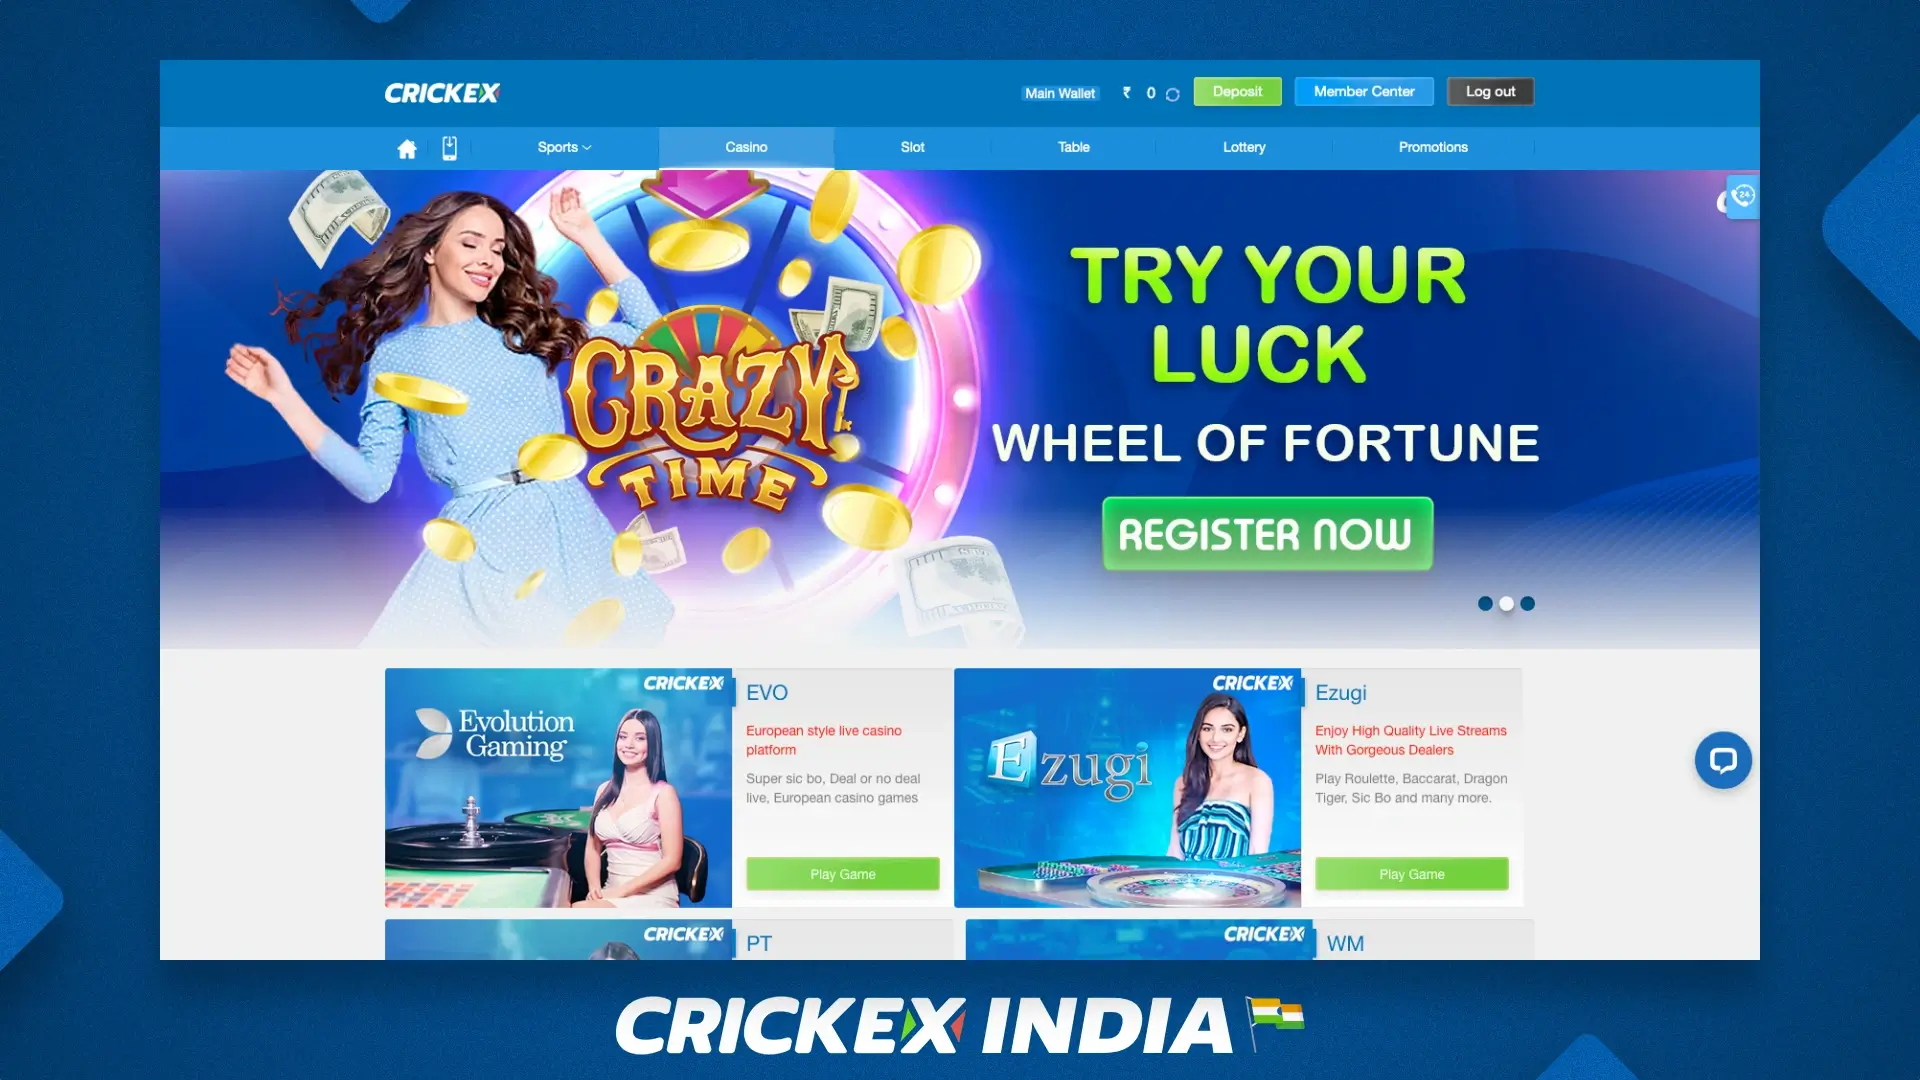 Advantages and benefits of Crickex online casino